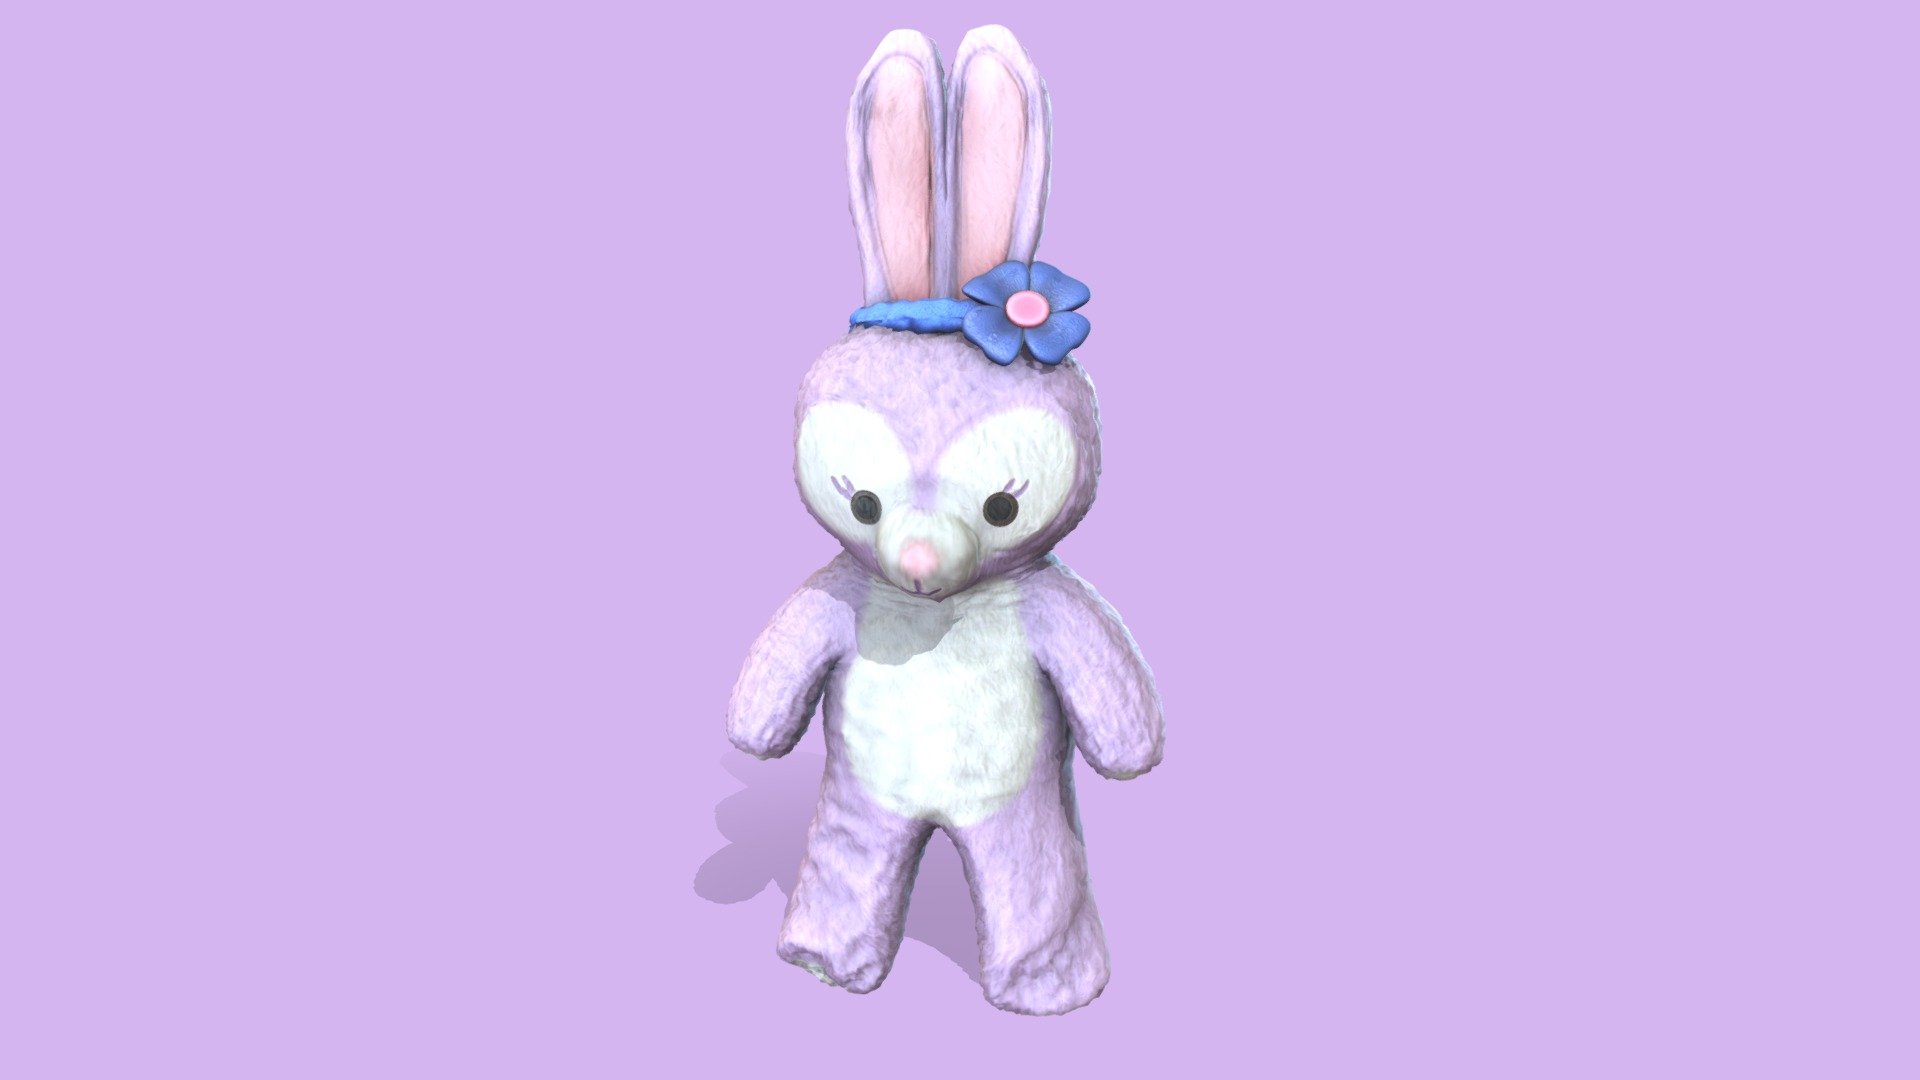 This object was created for The Sims 3 and The Sims 4 and it's available for download as decorative plush for the game

If you plan to use it in any other project then please give credits. Commercial use is not allowed. ◕‿◕

 - Stella Lou Rabbit Plush - For The Sims - 3D model by Hydrangea (@HydrangeaChainsaw) 3d model